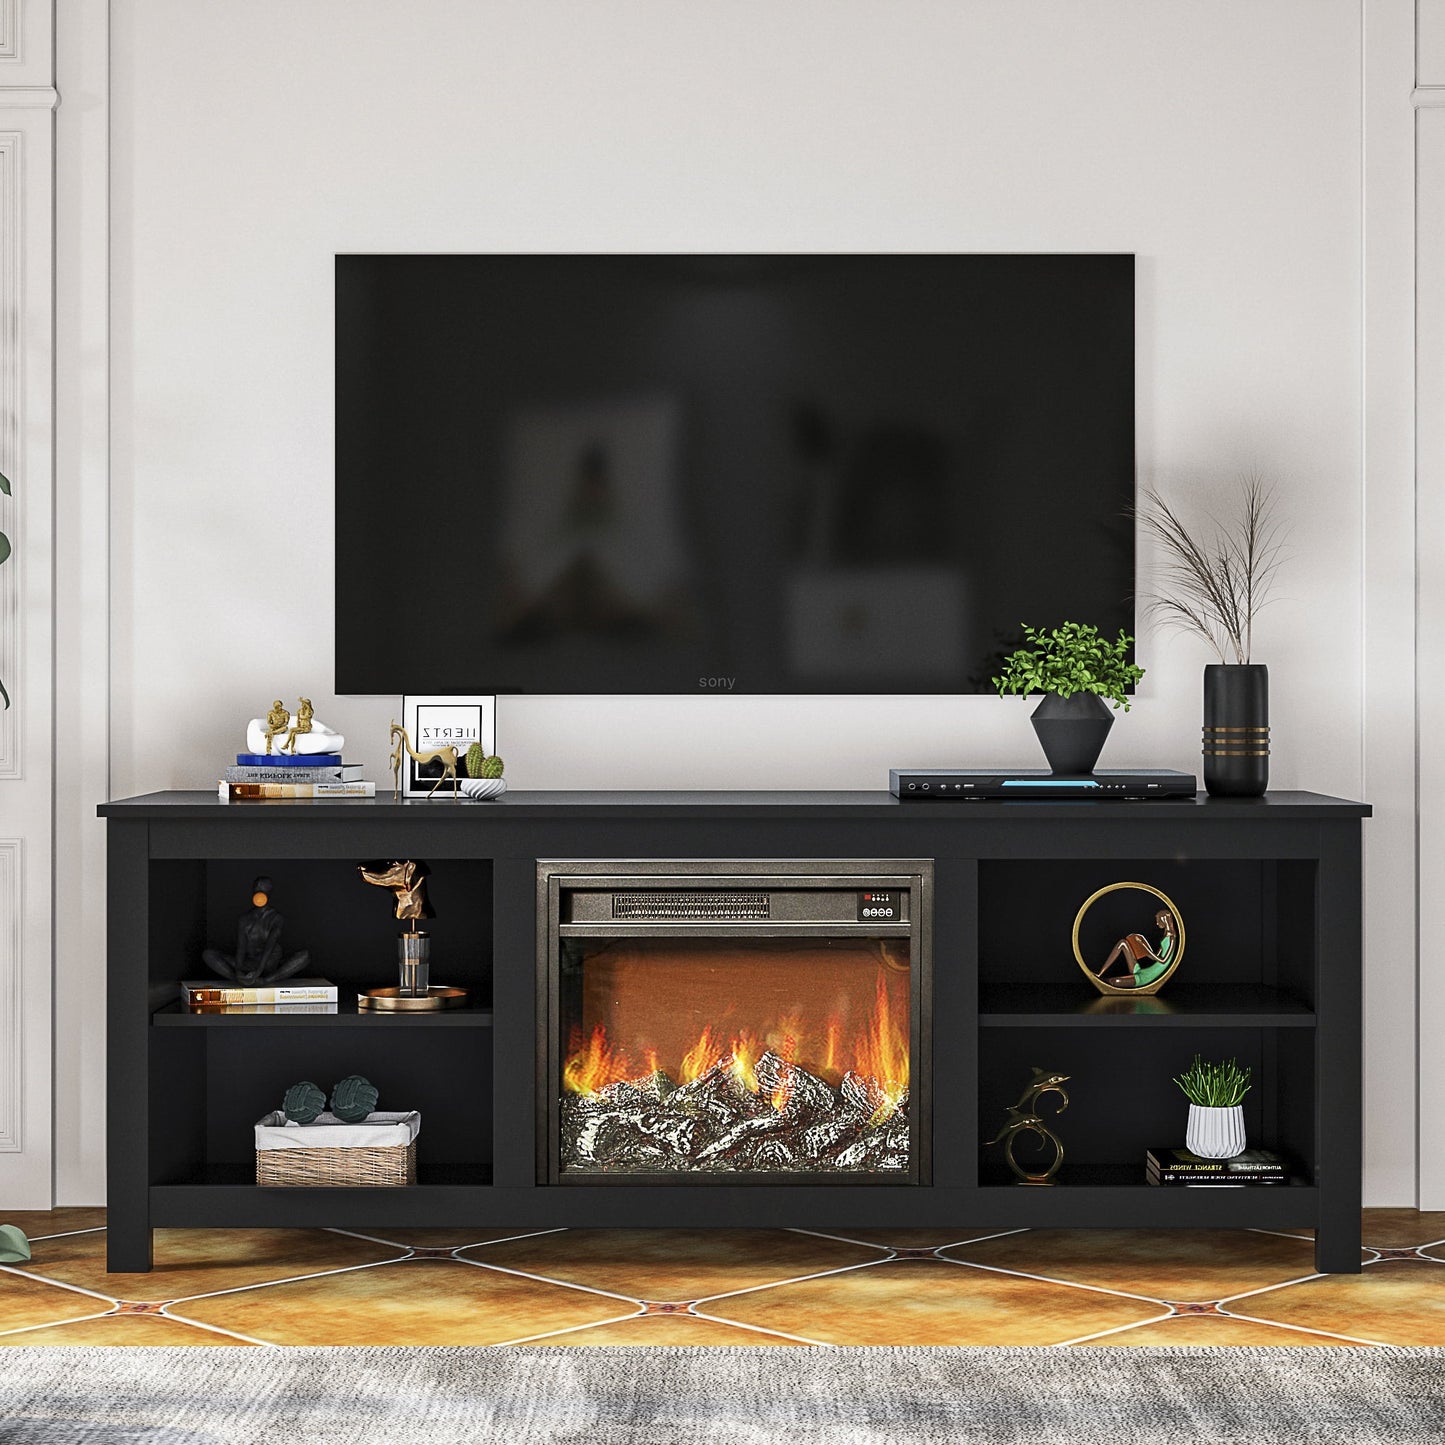 SYNGAR Modern TV Cabinet for TVs up to 65", Electric Fireplace TV Stand, Retro Farmhouse TV Stand with Fireplace & Storage, Media Entertainment Console Center for Living Room, Bedroom, Espresso, D3190